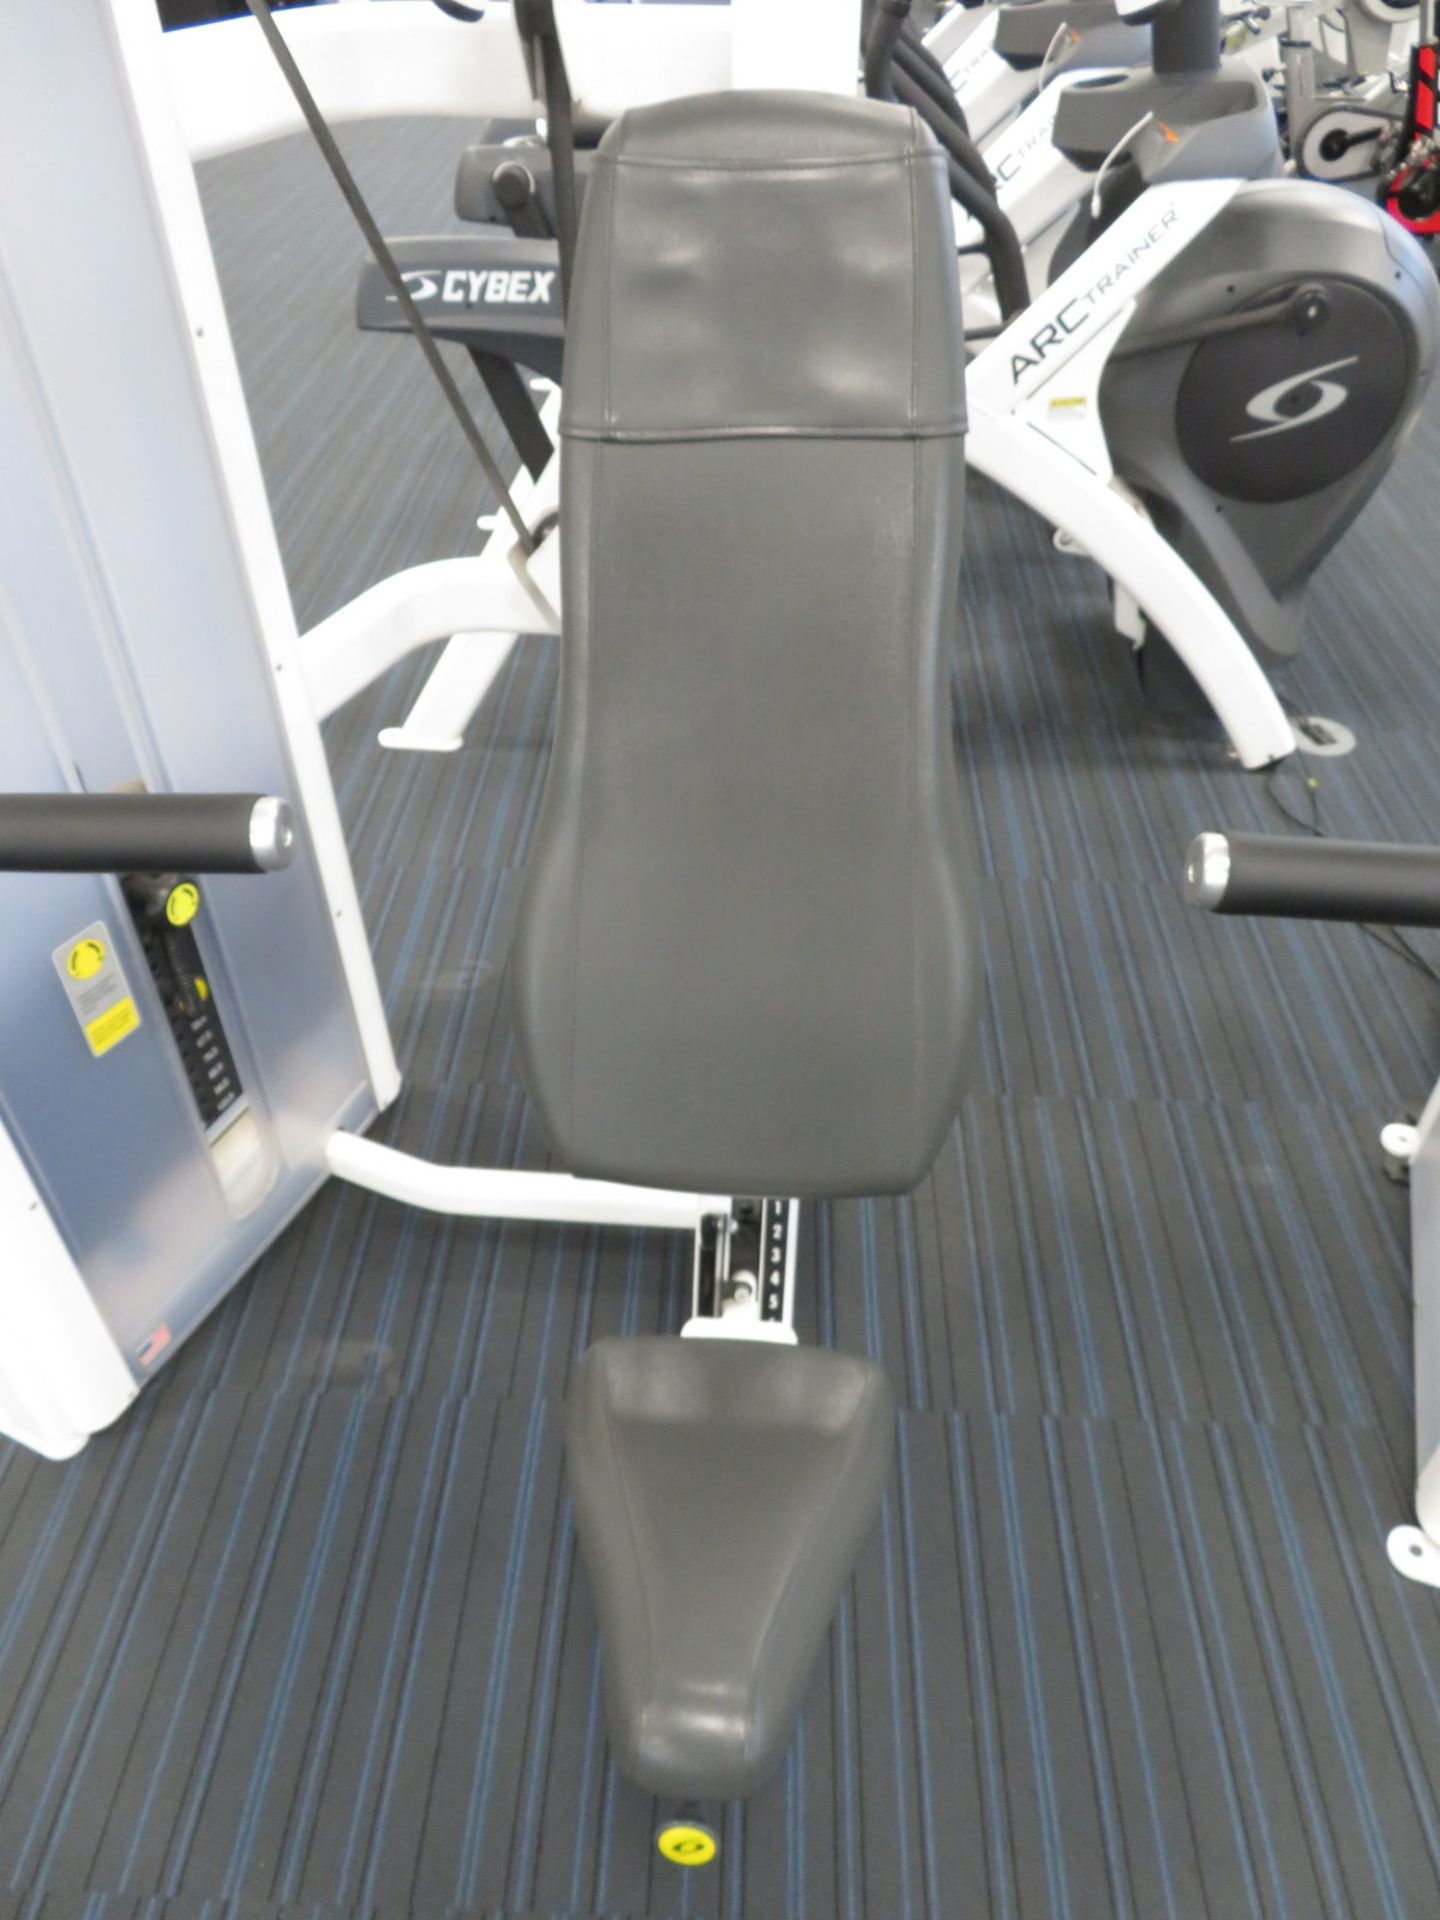 Cybex Chest Press Model: 12001. 103.5kg Weight Stack. Dimensions: 140x135x195cm (LxDxH) Pl - Image 3 of 8